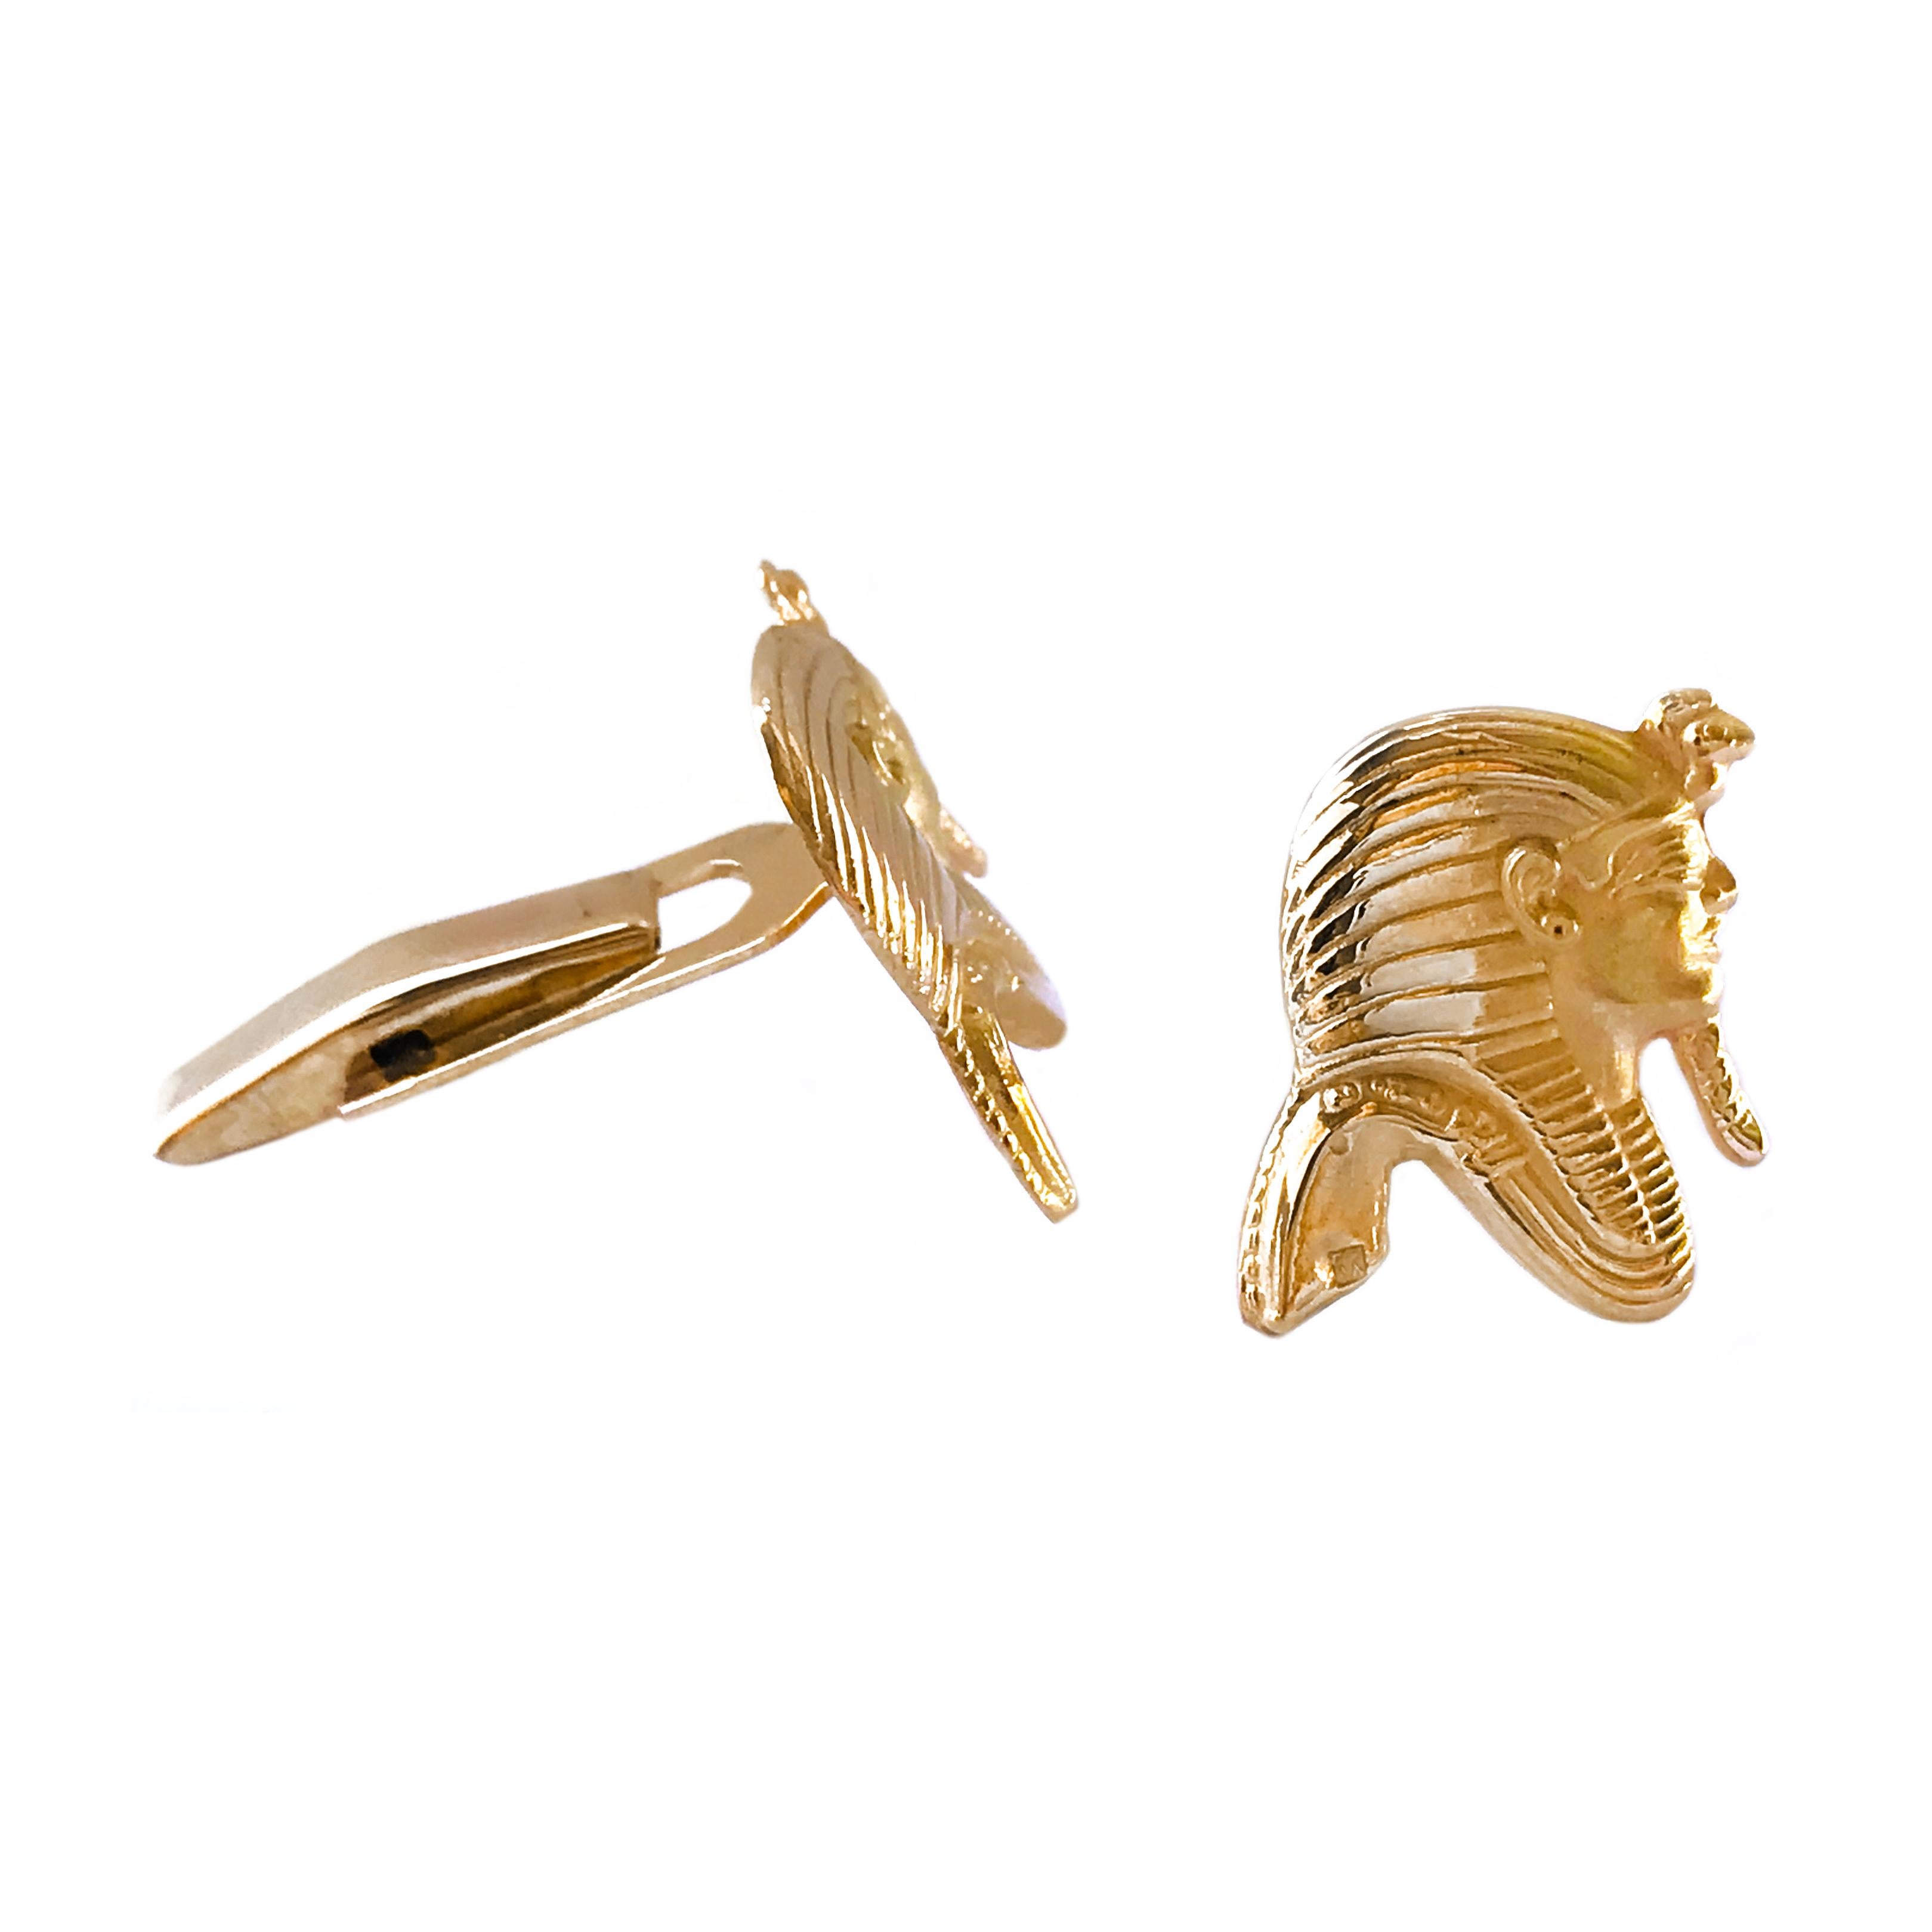 18 Karat tested Tutankhamun Egyptian Pharaoh Cufflinks. The fronts feature the infamous boy king's golden mask in profile with meticulous detail. The cufflinks have a smooth back, a dual post, and whale tail toggle backings. The cufflink measure